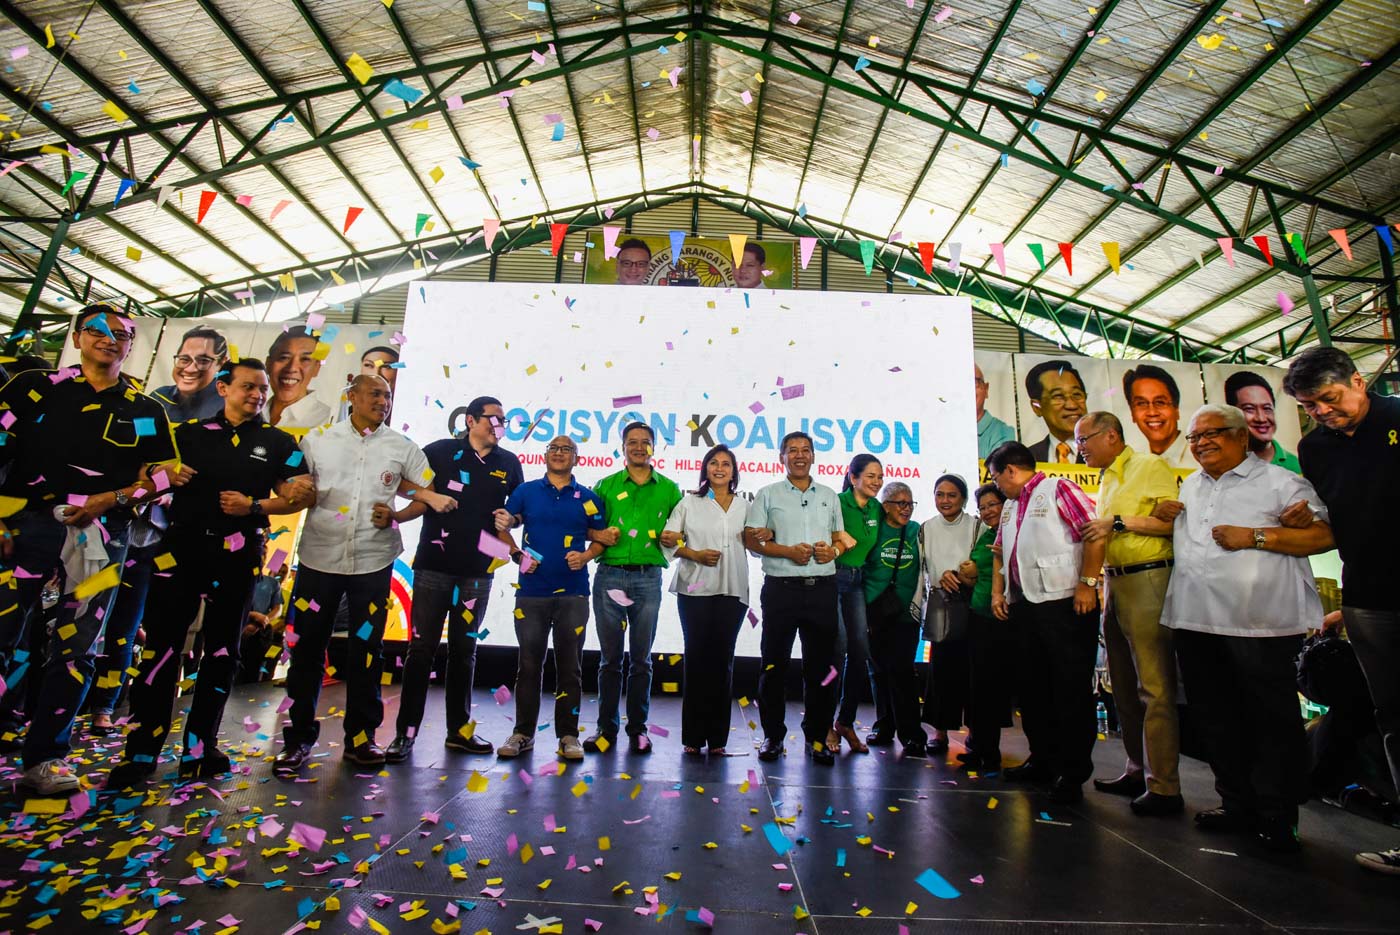 THE OPPOSITION. Vice President Leni Robredo (middle, in white) together with the Oposisyon Koalisyon's 8 senatorial bets and other key opposition figures. Photo by Maria Tan/Rappler 